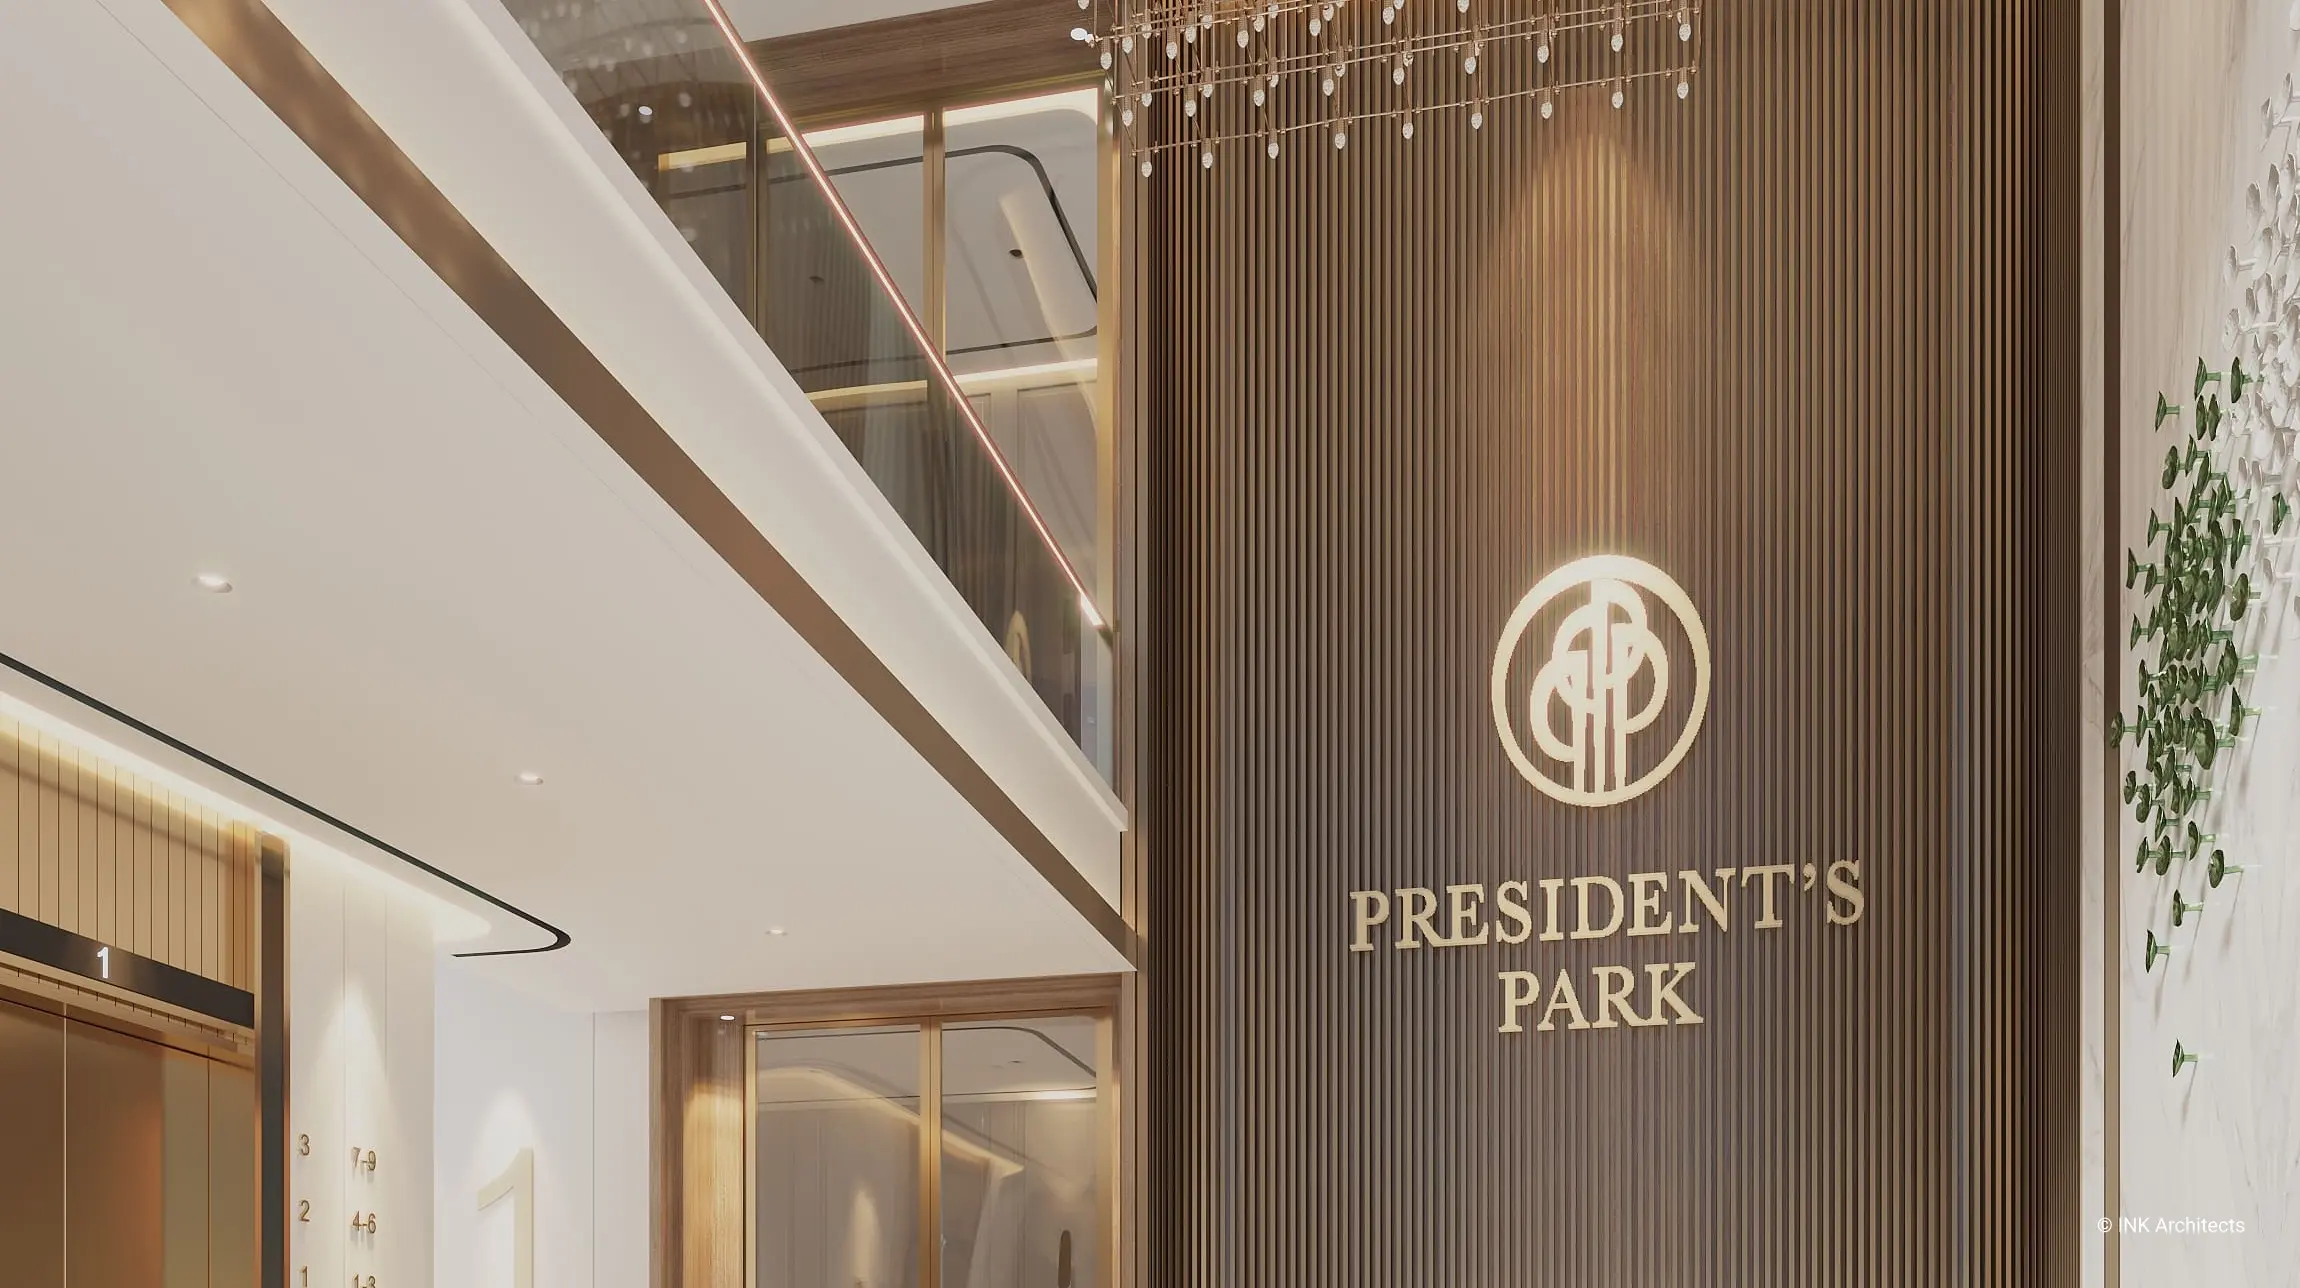 Interior design for the residential complex President's Park. Interior design services. Architectural firm INK Architects